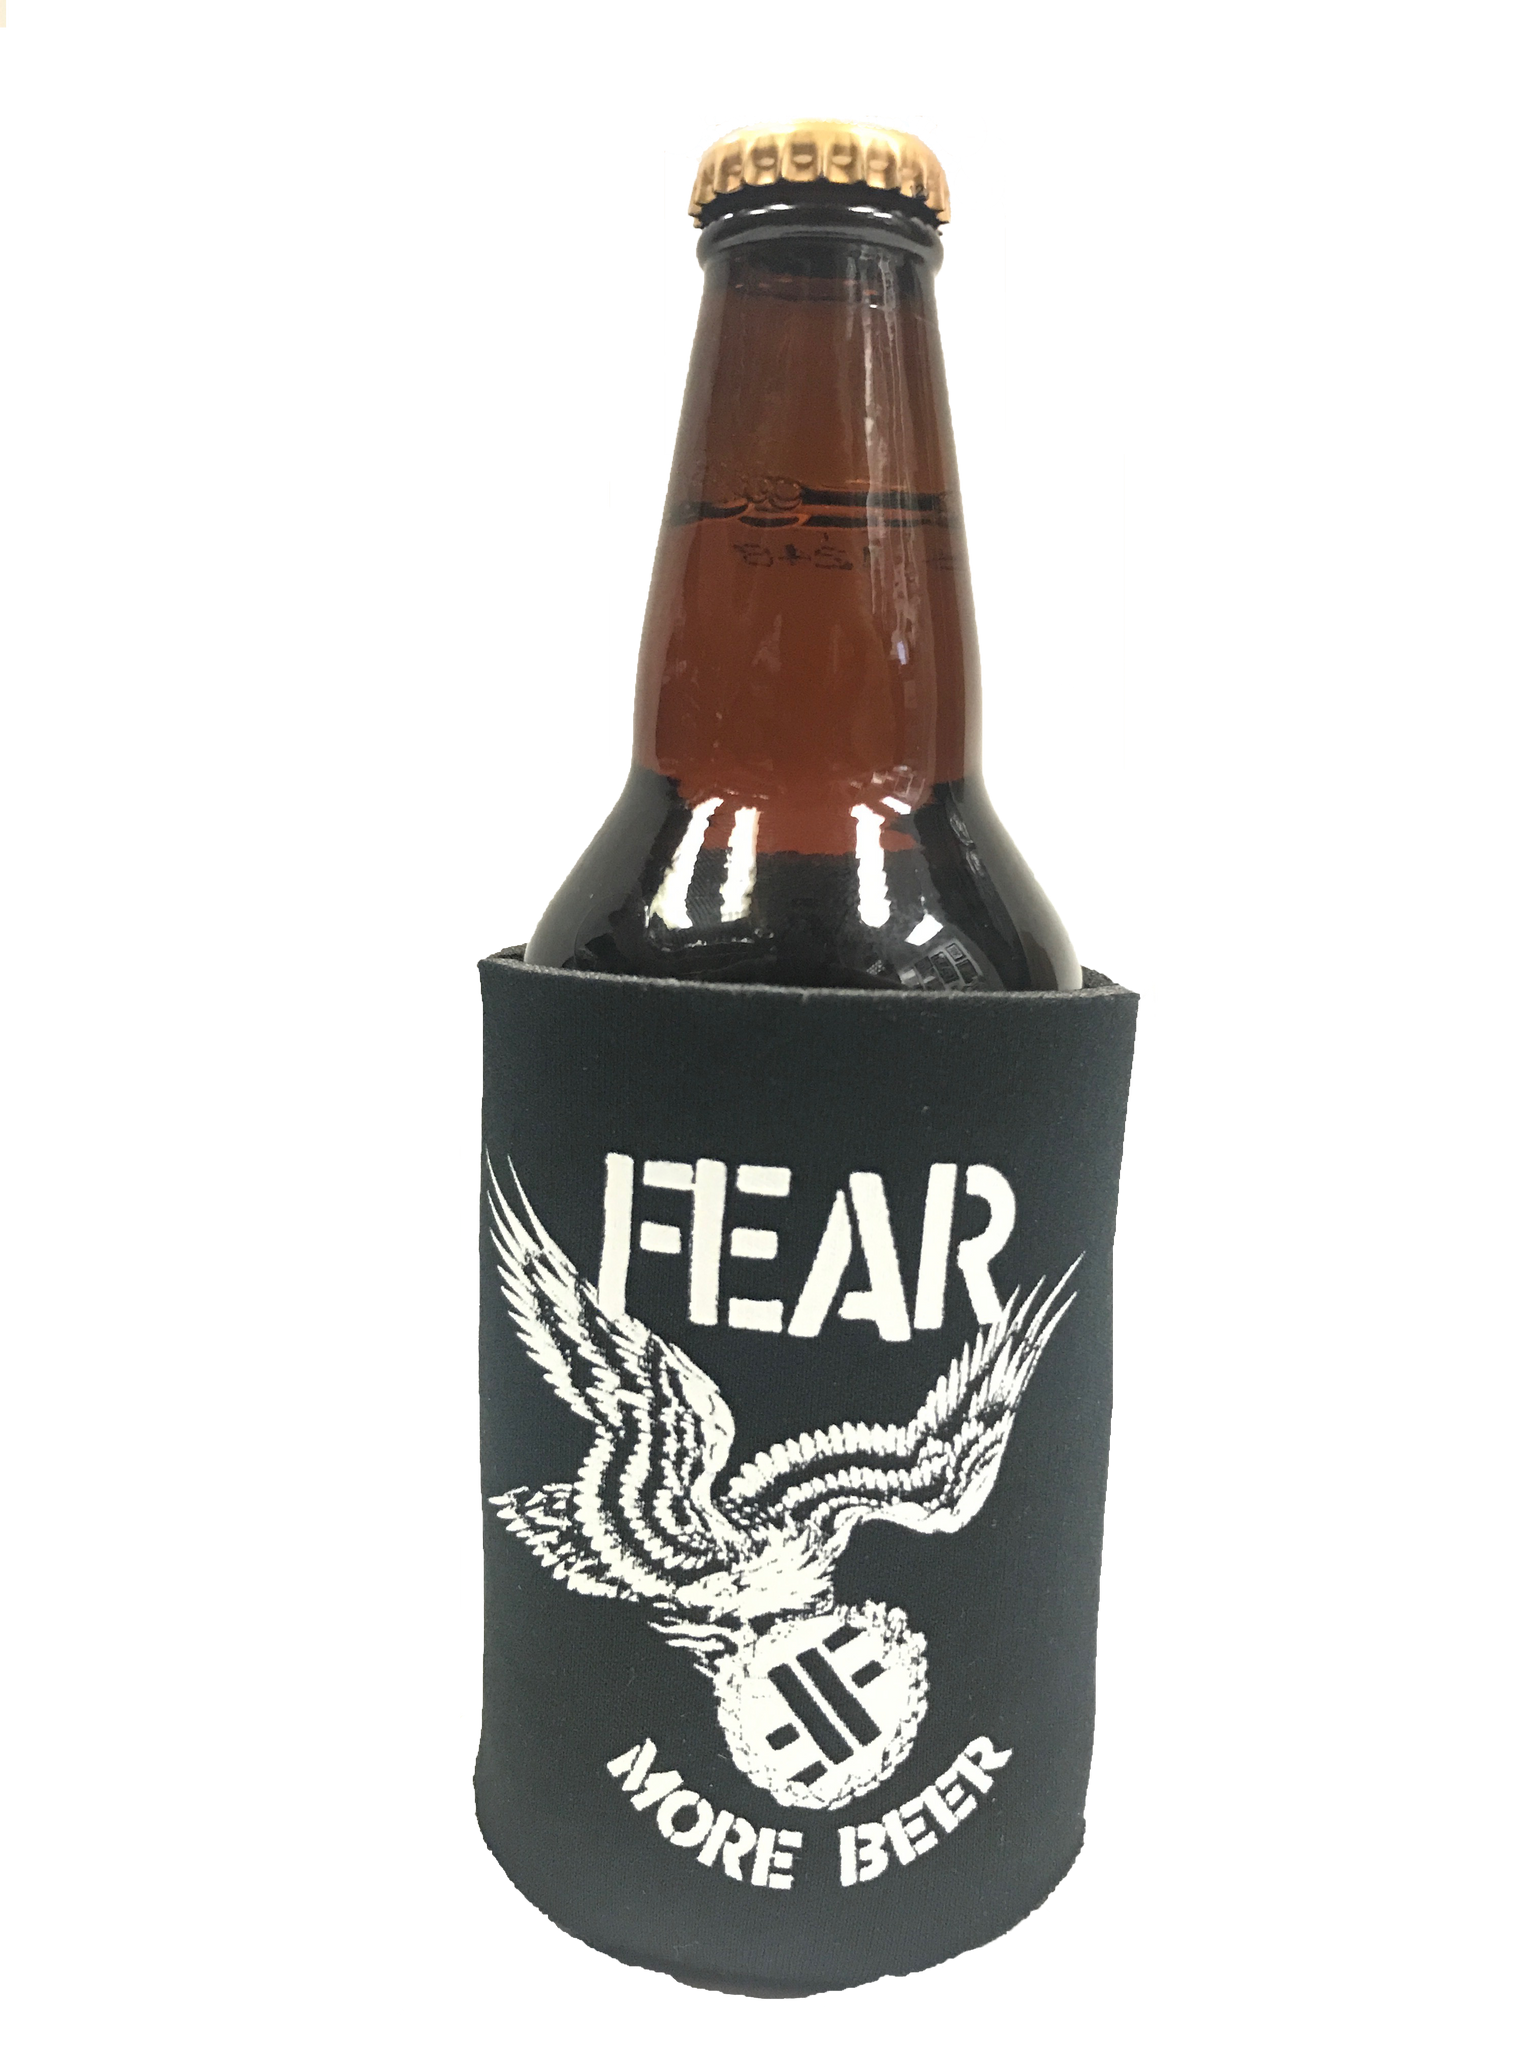 FEAR "MORE BEER EAGLE LOGO" CAN AND BOTTLE INSULATOR